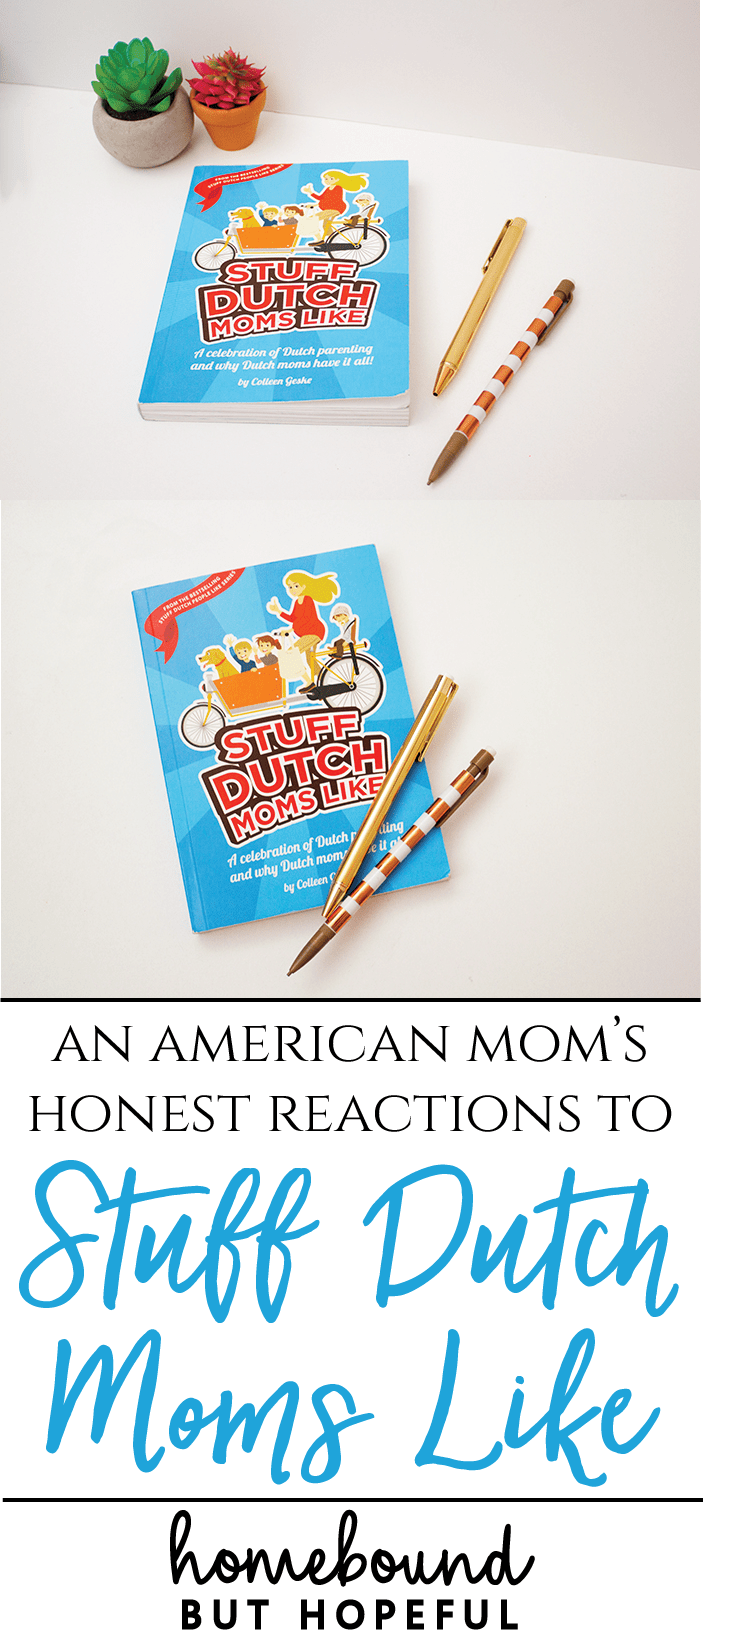 Are Dutch moms really the happiest? Check out my review of Colleen Geske's newest book, What Dutch Moms Like.